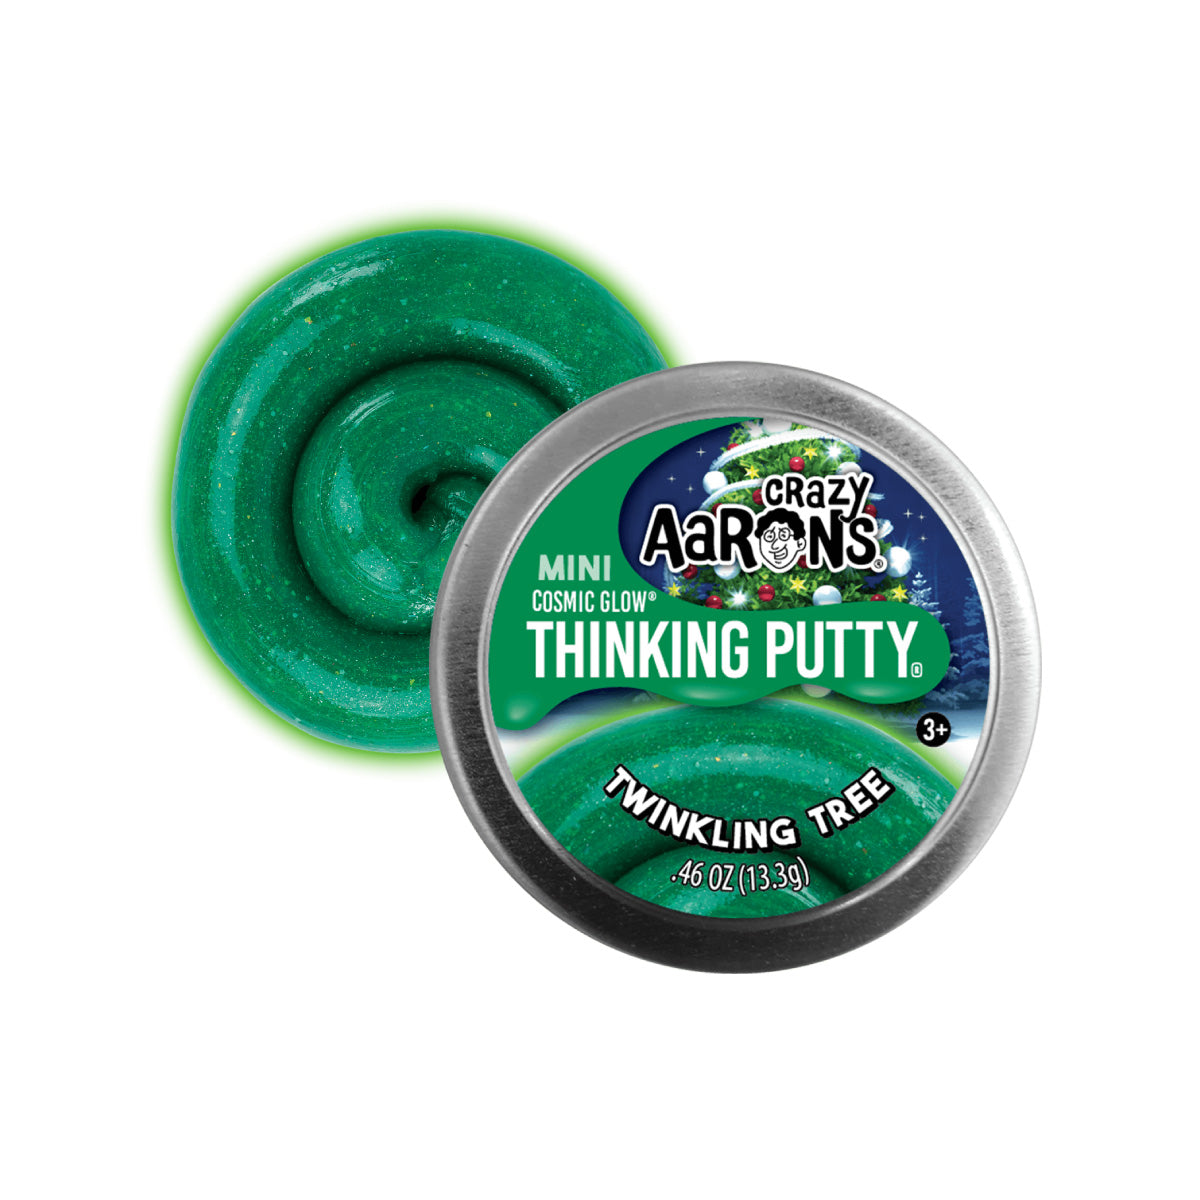 Crazy Aaron's Thinking Putty Twinkling Tree Holiday Mini Tin